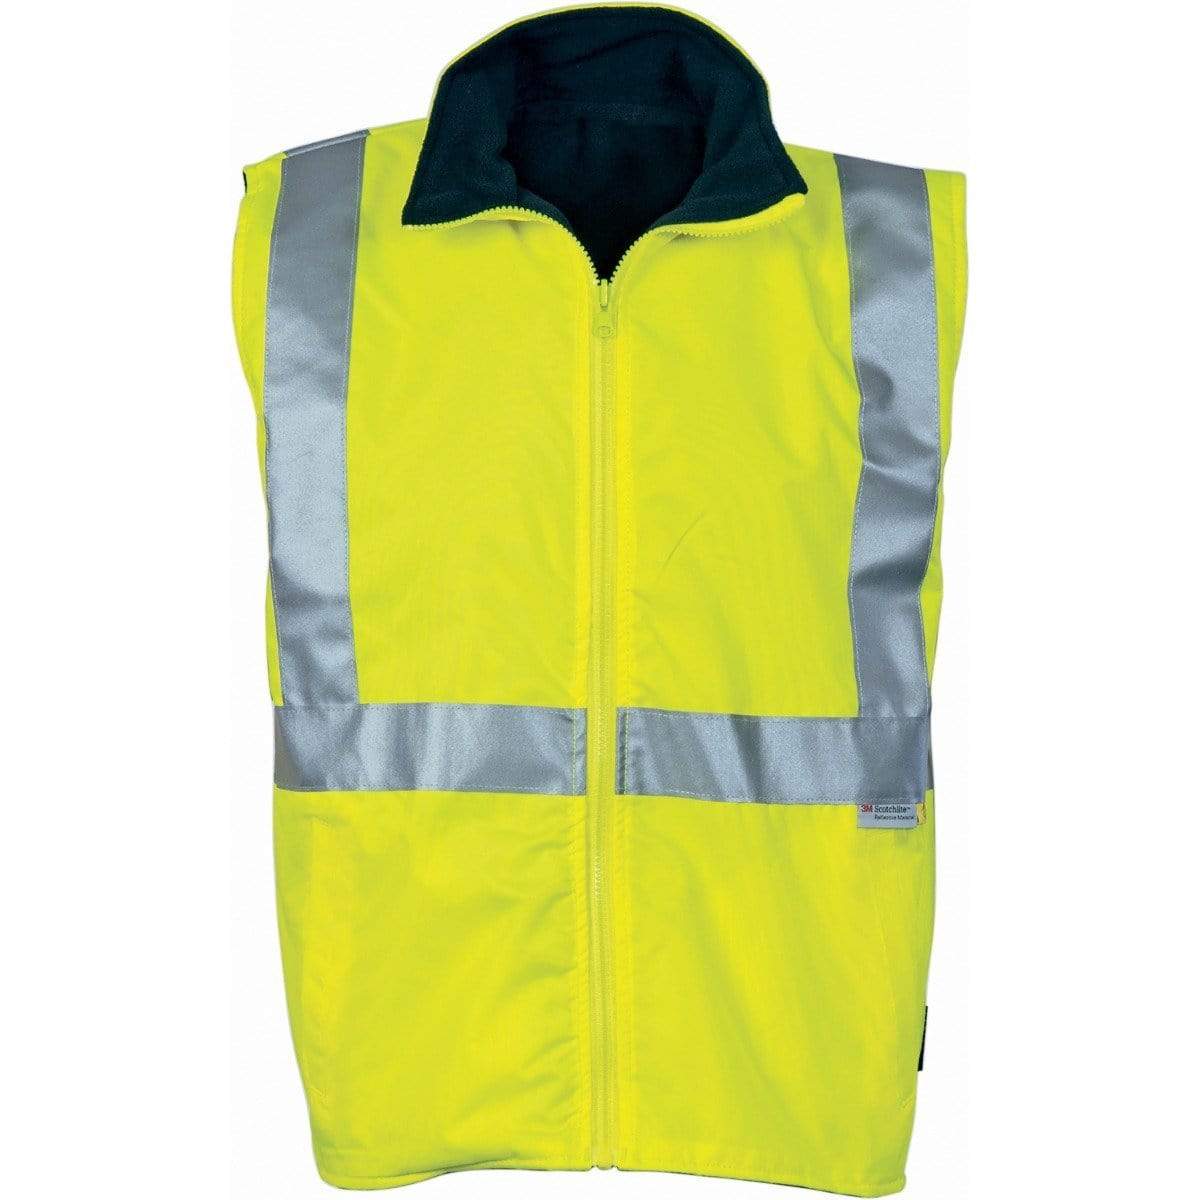 Hi-vis Reversible Vest With 3m Reflective Tape-yellow/navy-xl - 3865 Work Wear DNC Workwear   